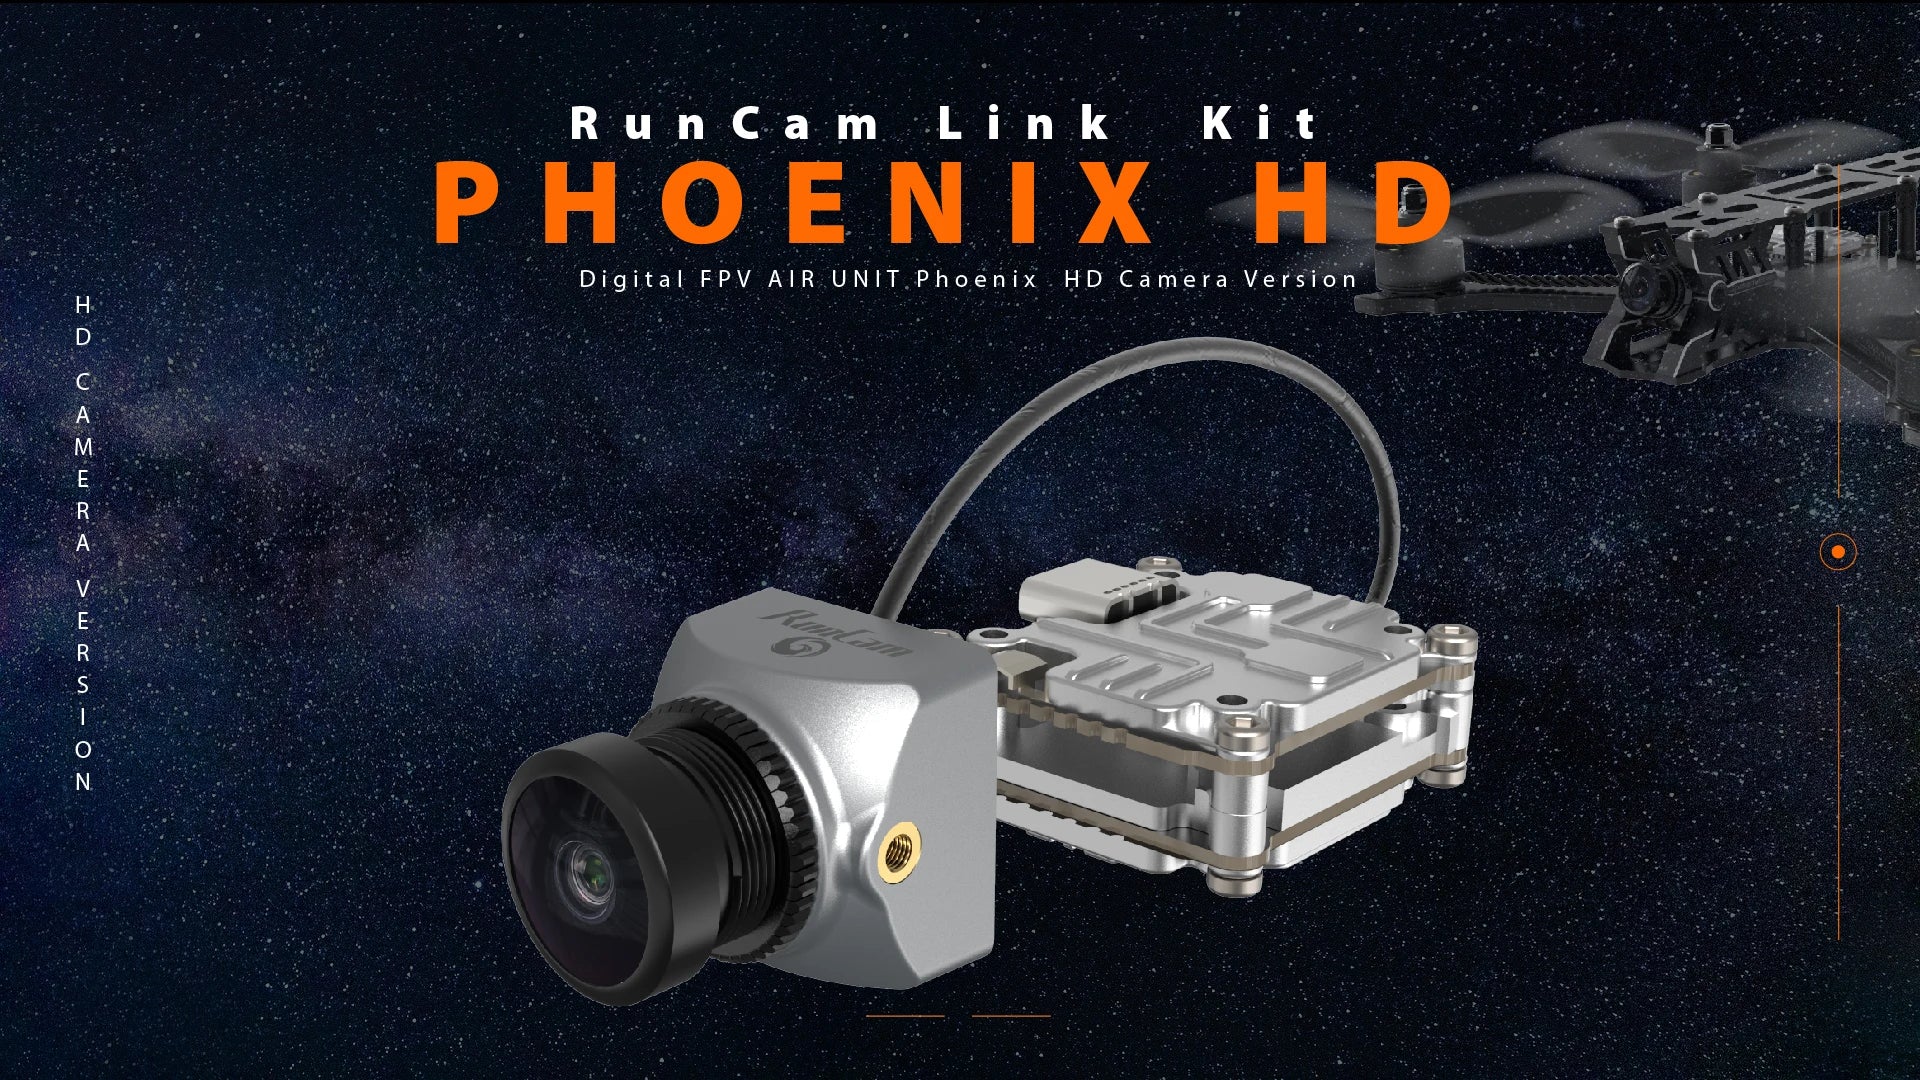 RunCam Link Phoenix HD Kit, we can declare a price of $20 to help you avoid any customs duties.